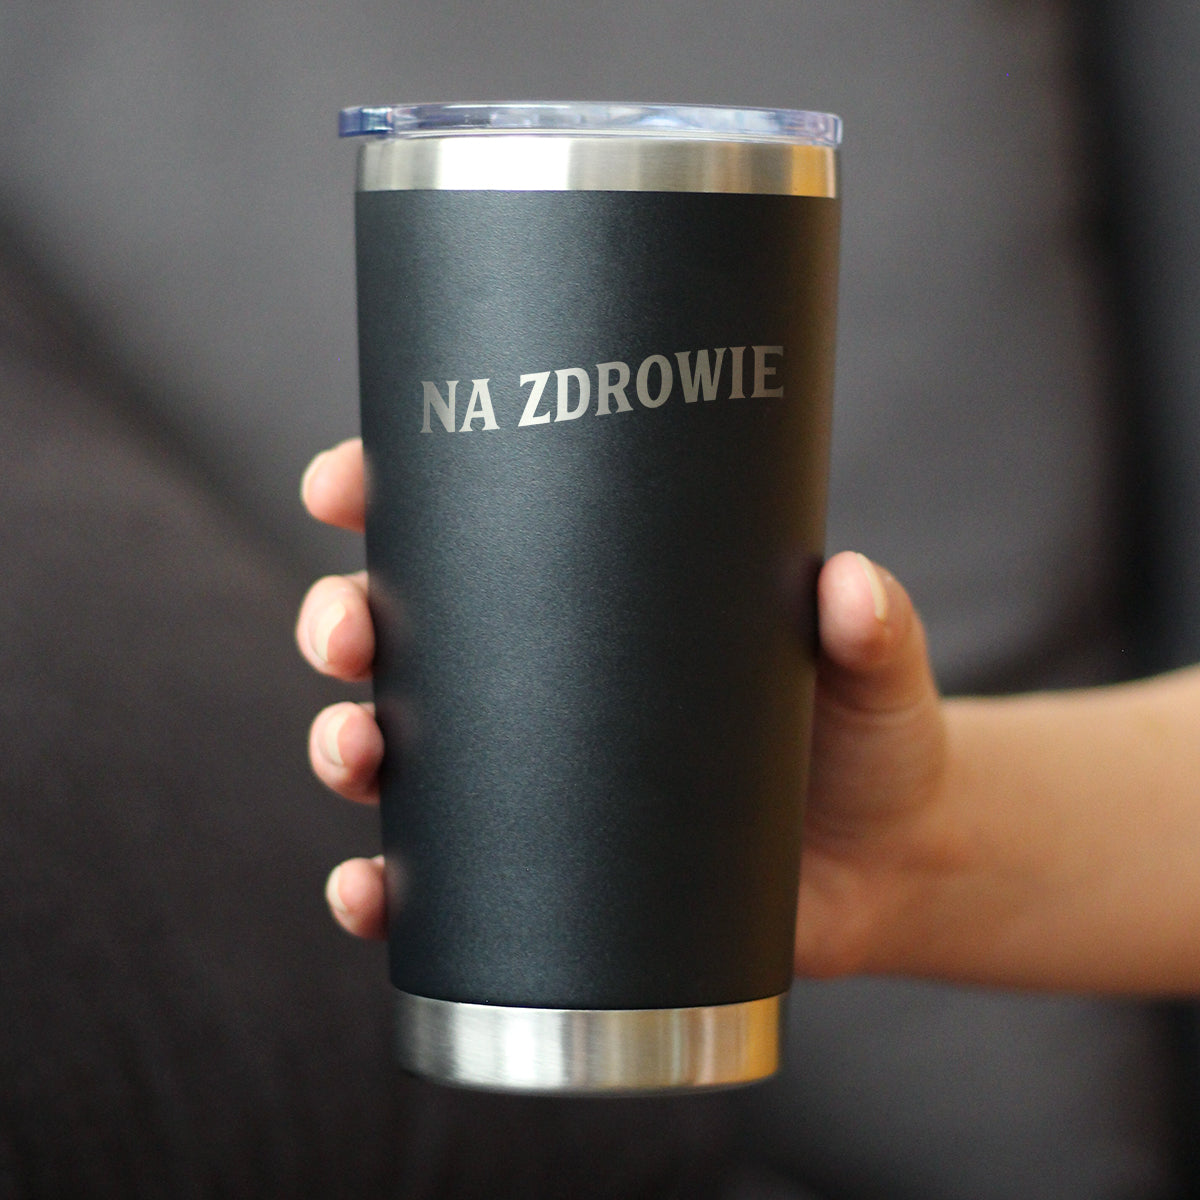 Na Zdrowie - Polish Cheers - Insulated Coffee Tumbler Cup with Sliding Lid - Stainless Steel Insulated Mug - Cute Poland Themed Gifts or Party Decor for Women and Men